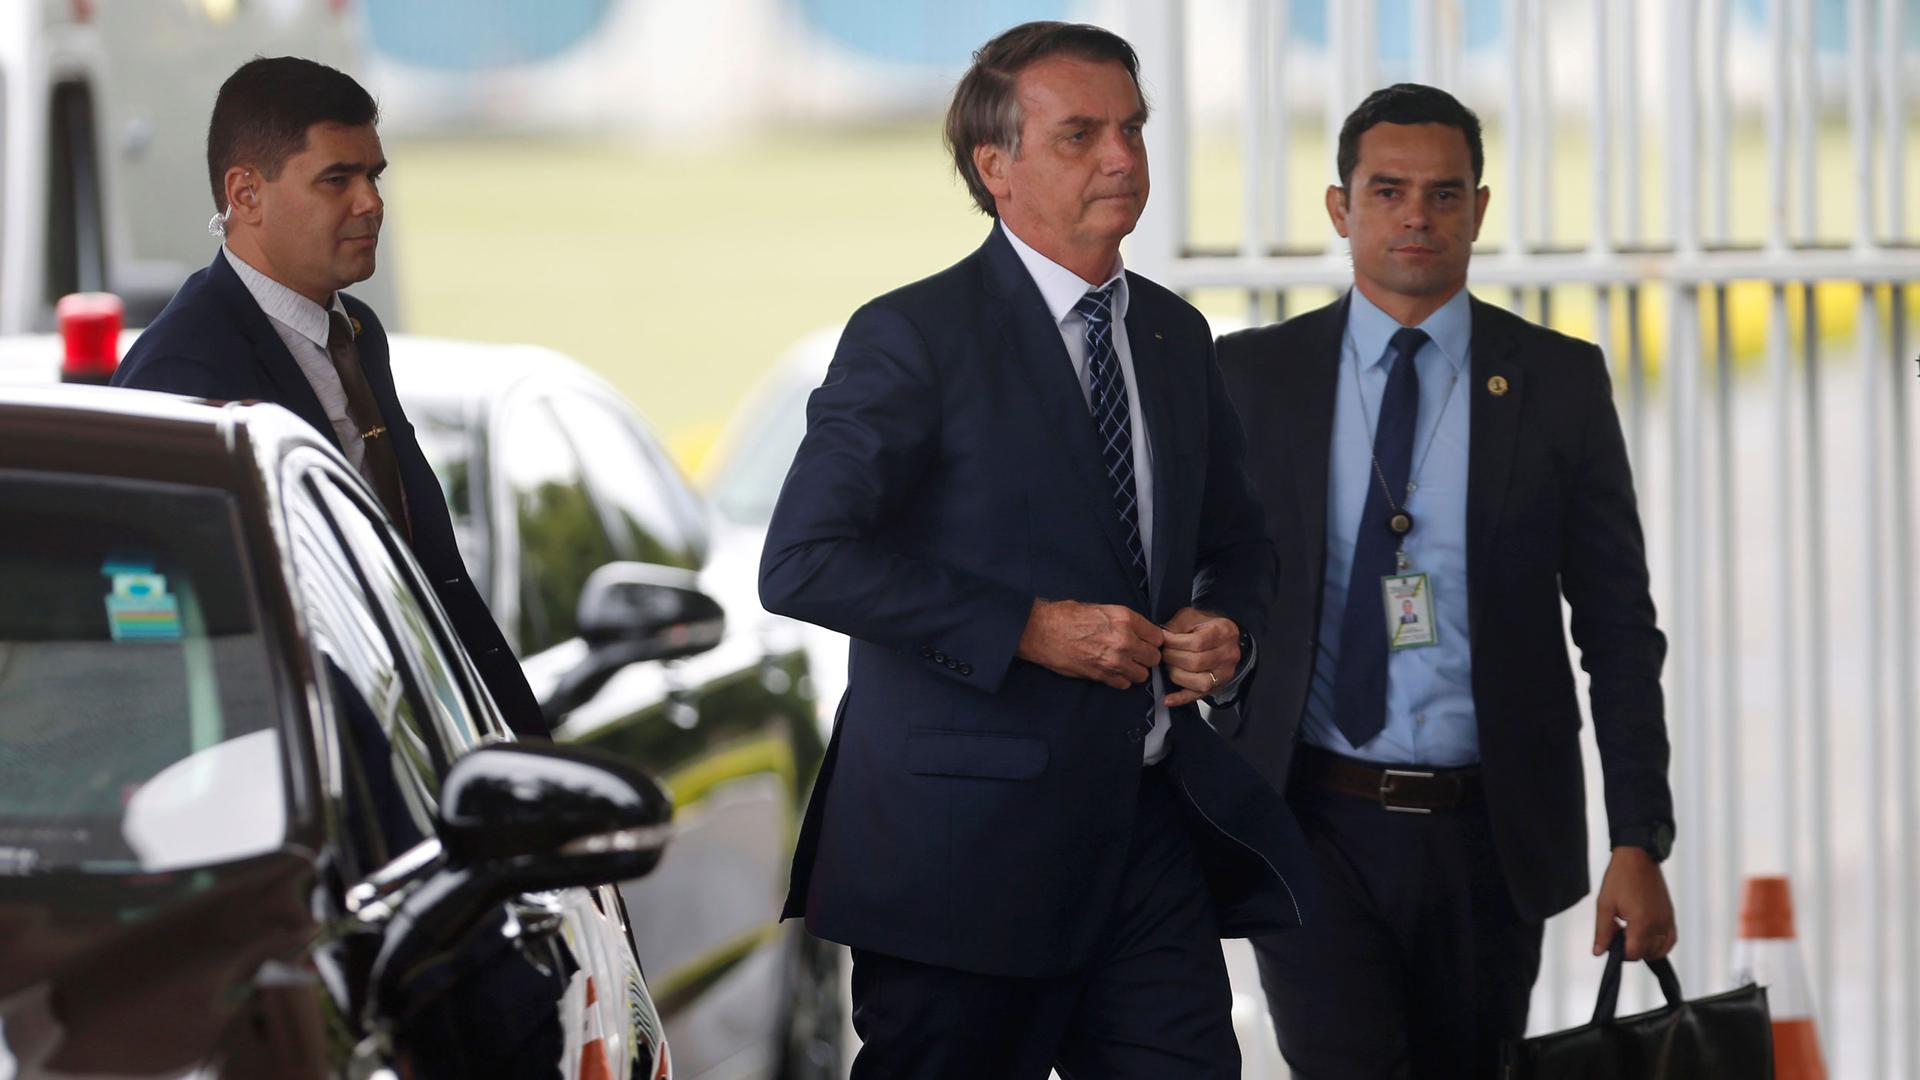 Brazil's President Jair Bolsonaro is shown buttoning his suit jacket and walking with security detail on either side.